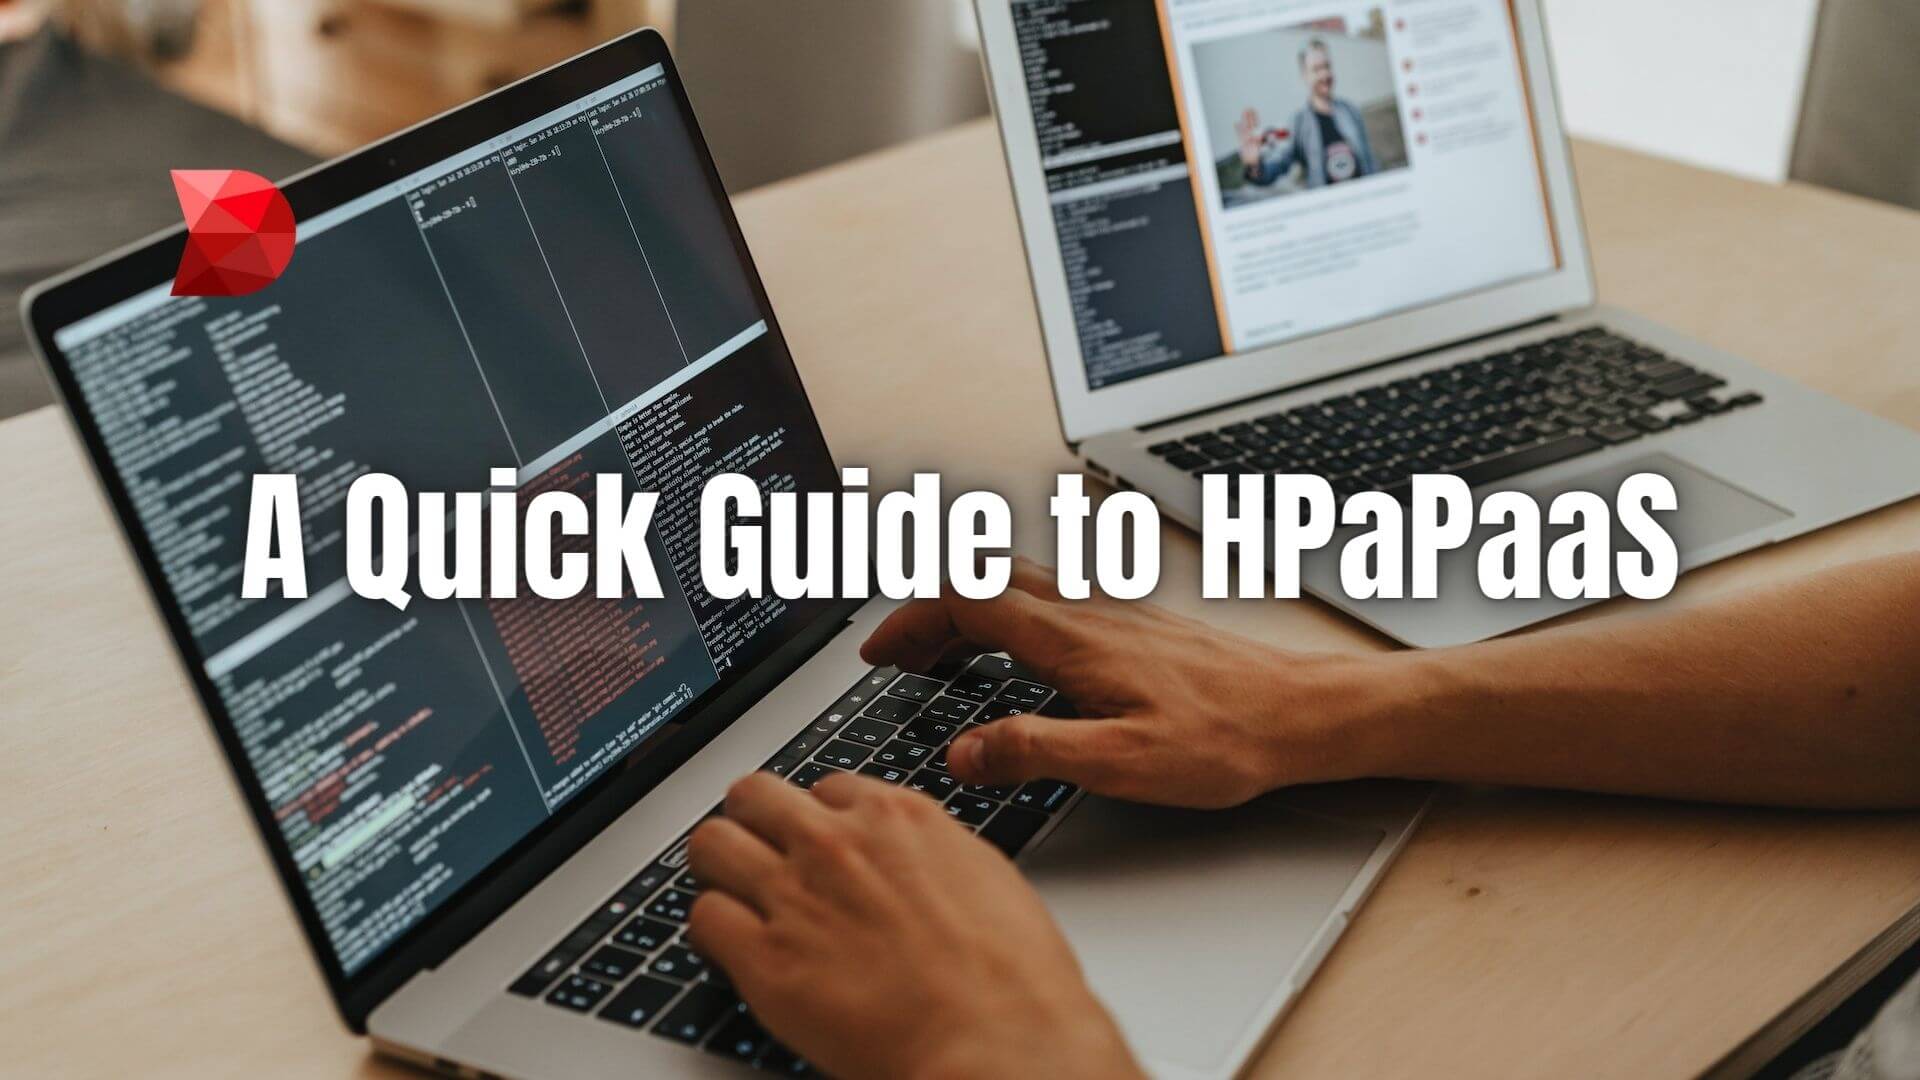 HPaPaaS is a kind of cloud computing service that gives users a platform for creating and deploying apps and boosts productivity. Learn more!